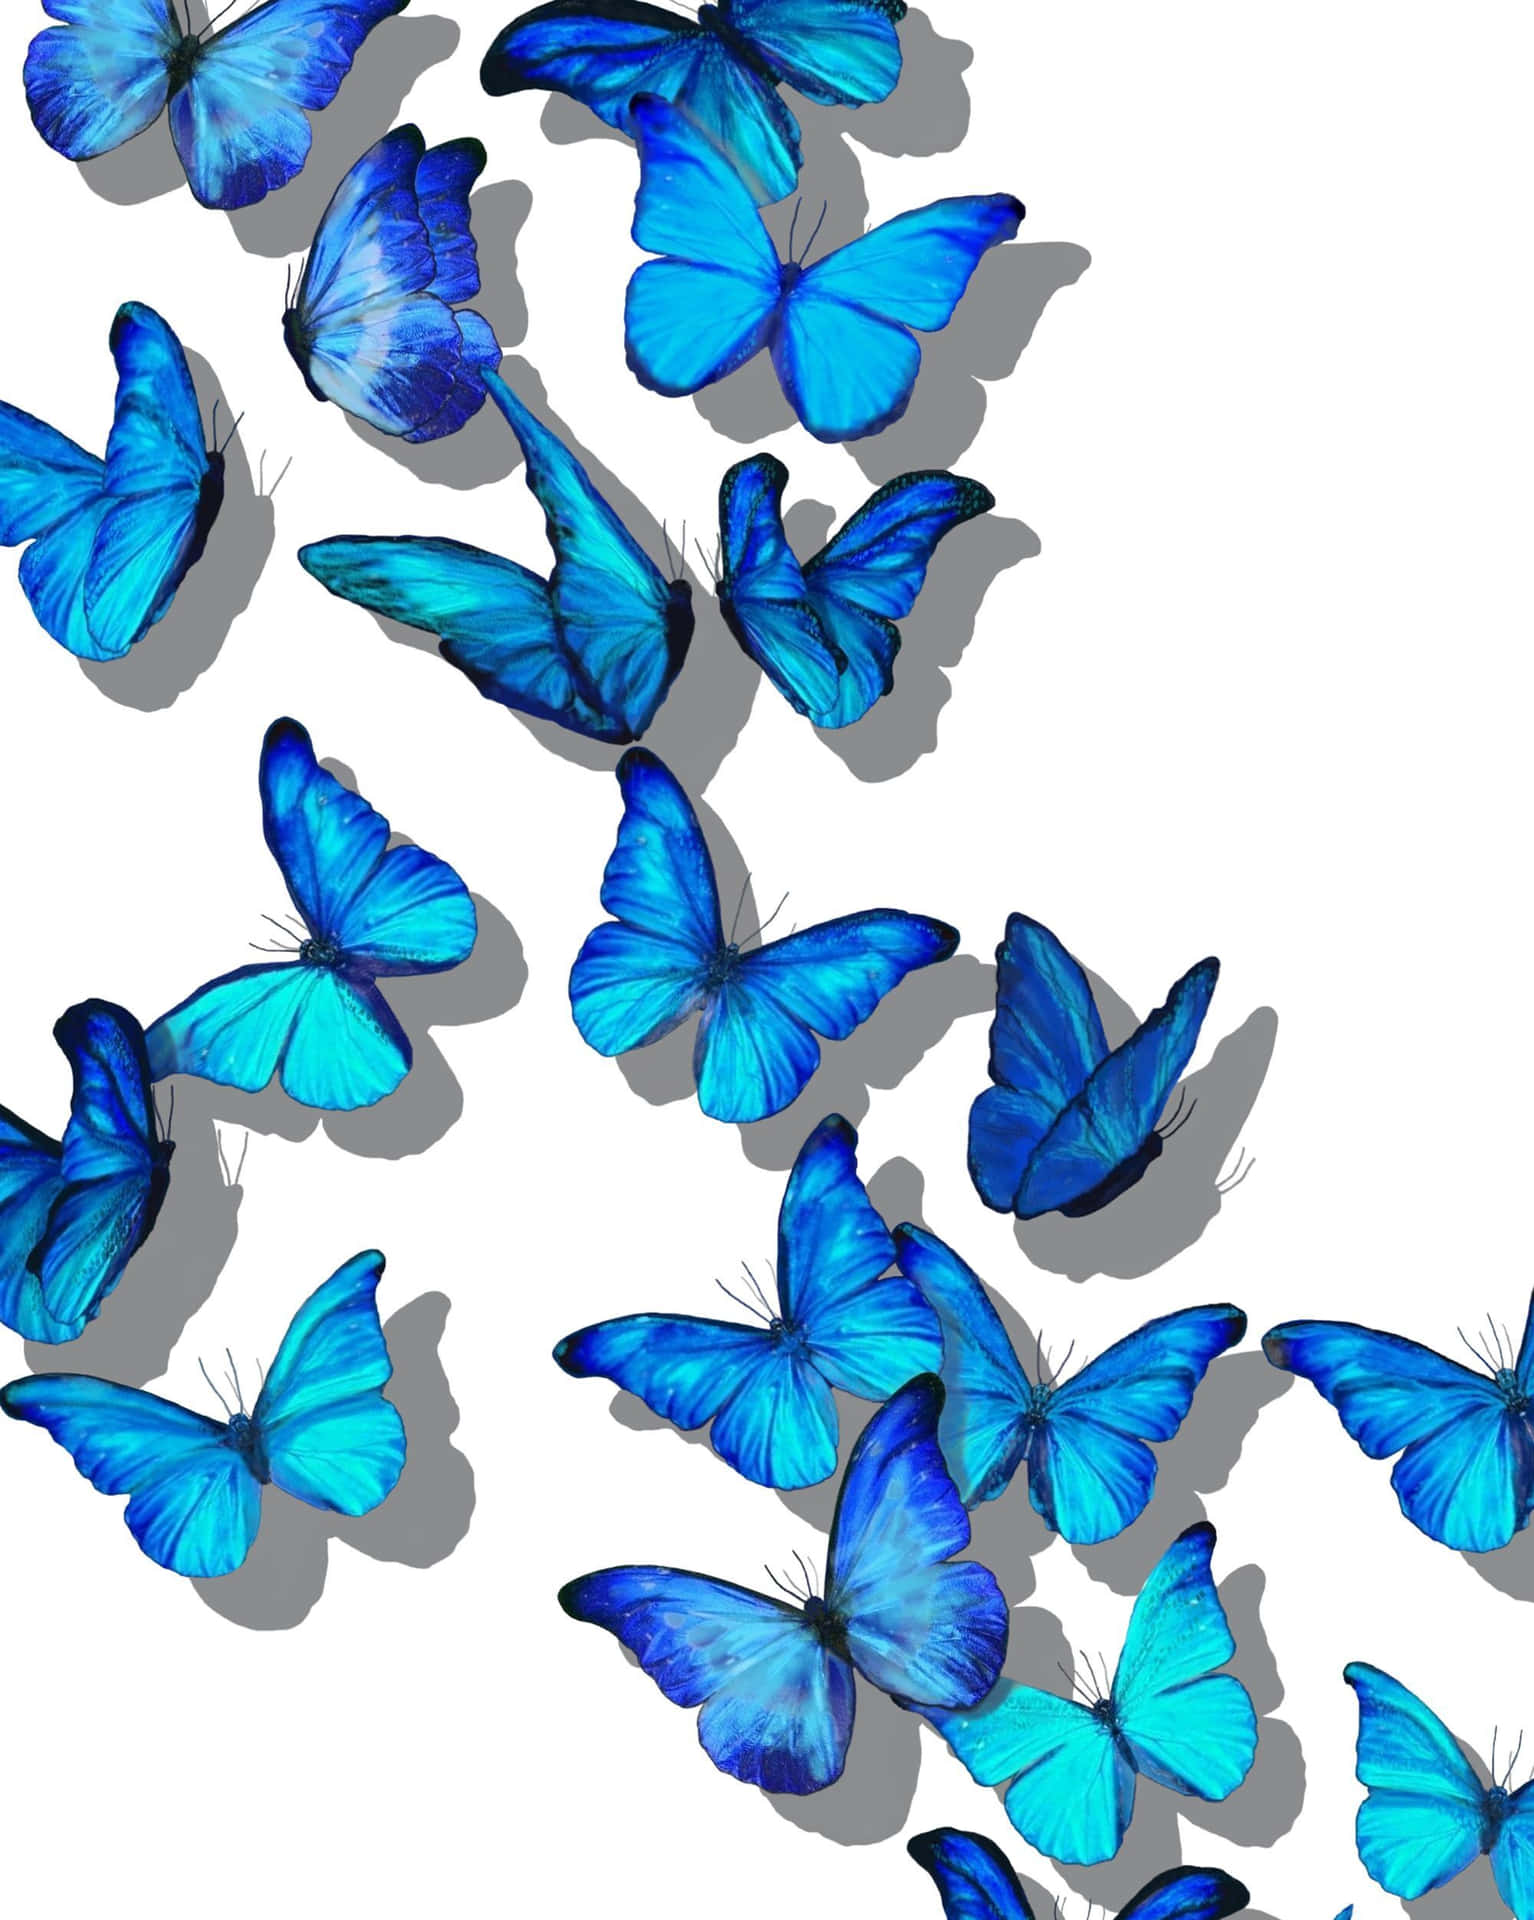 Download A blue butterfly soars amongst blooming flowers | Wallpapers.com